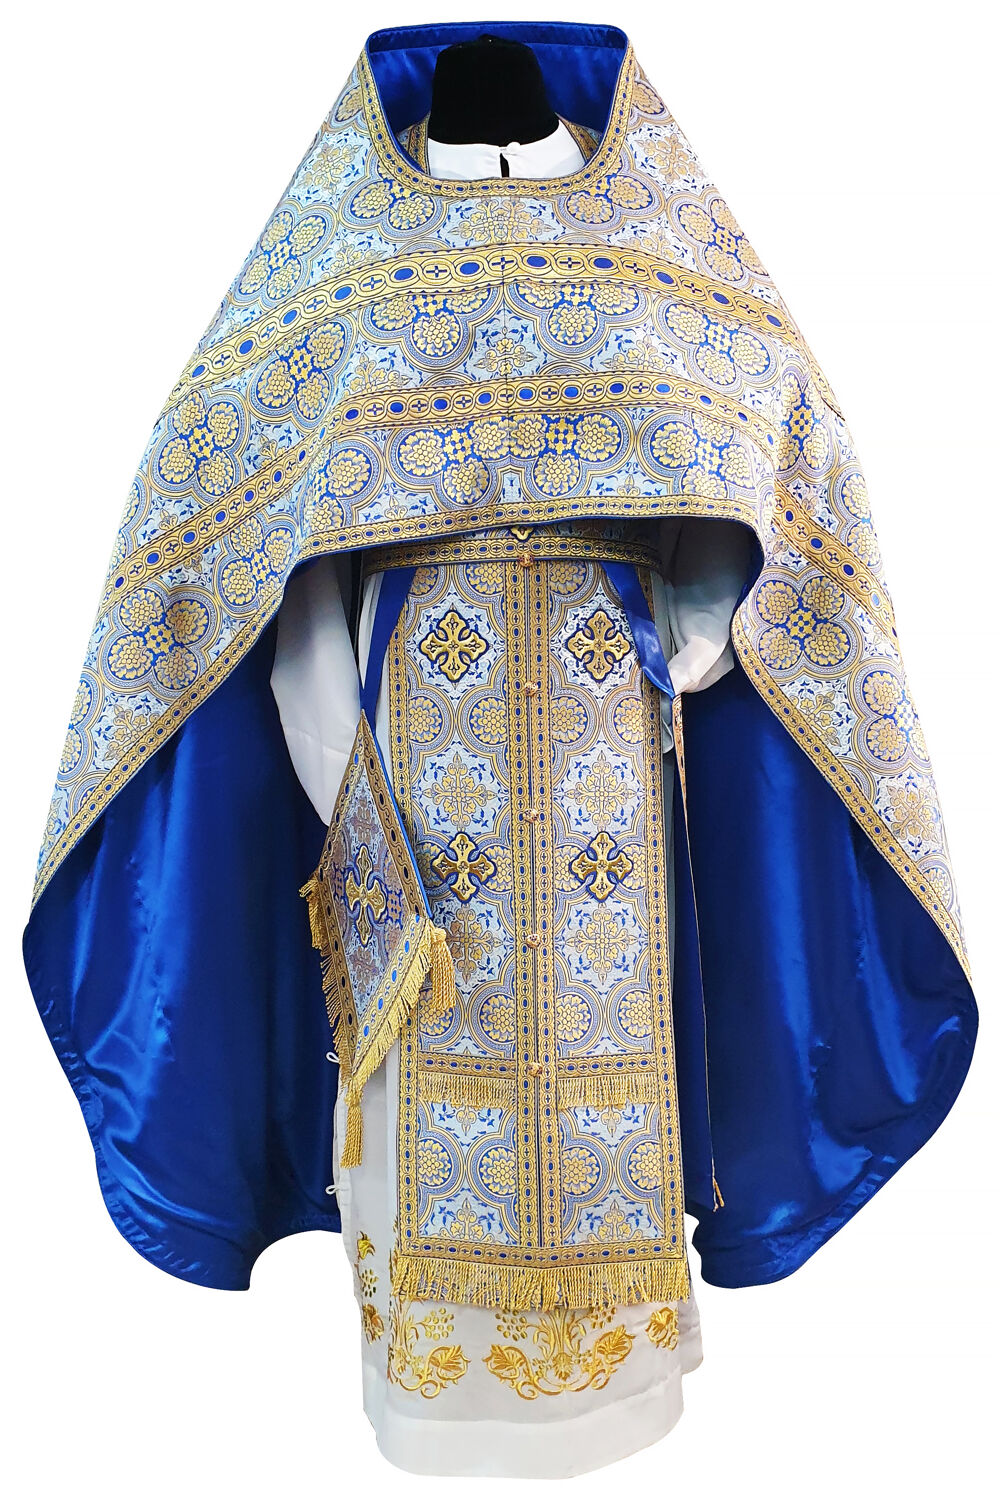 PRIEST'S VESTMENT BLUE • buy | for sale >>> ORTHODOX